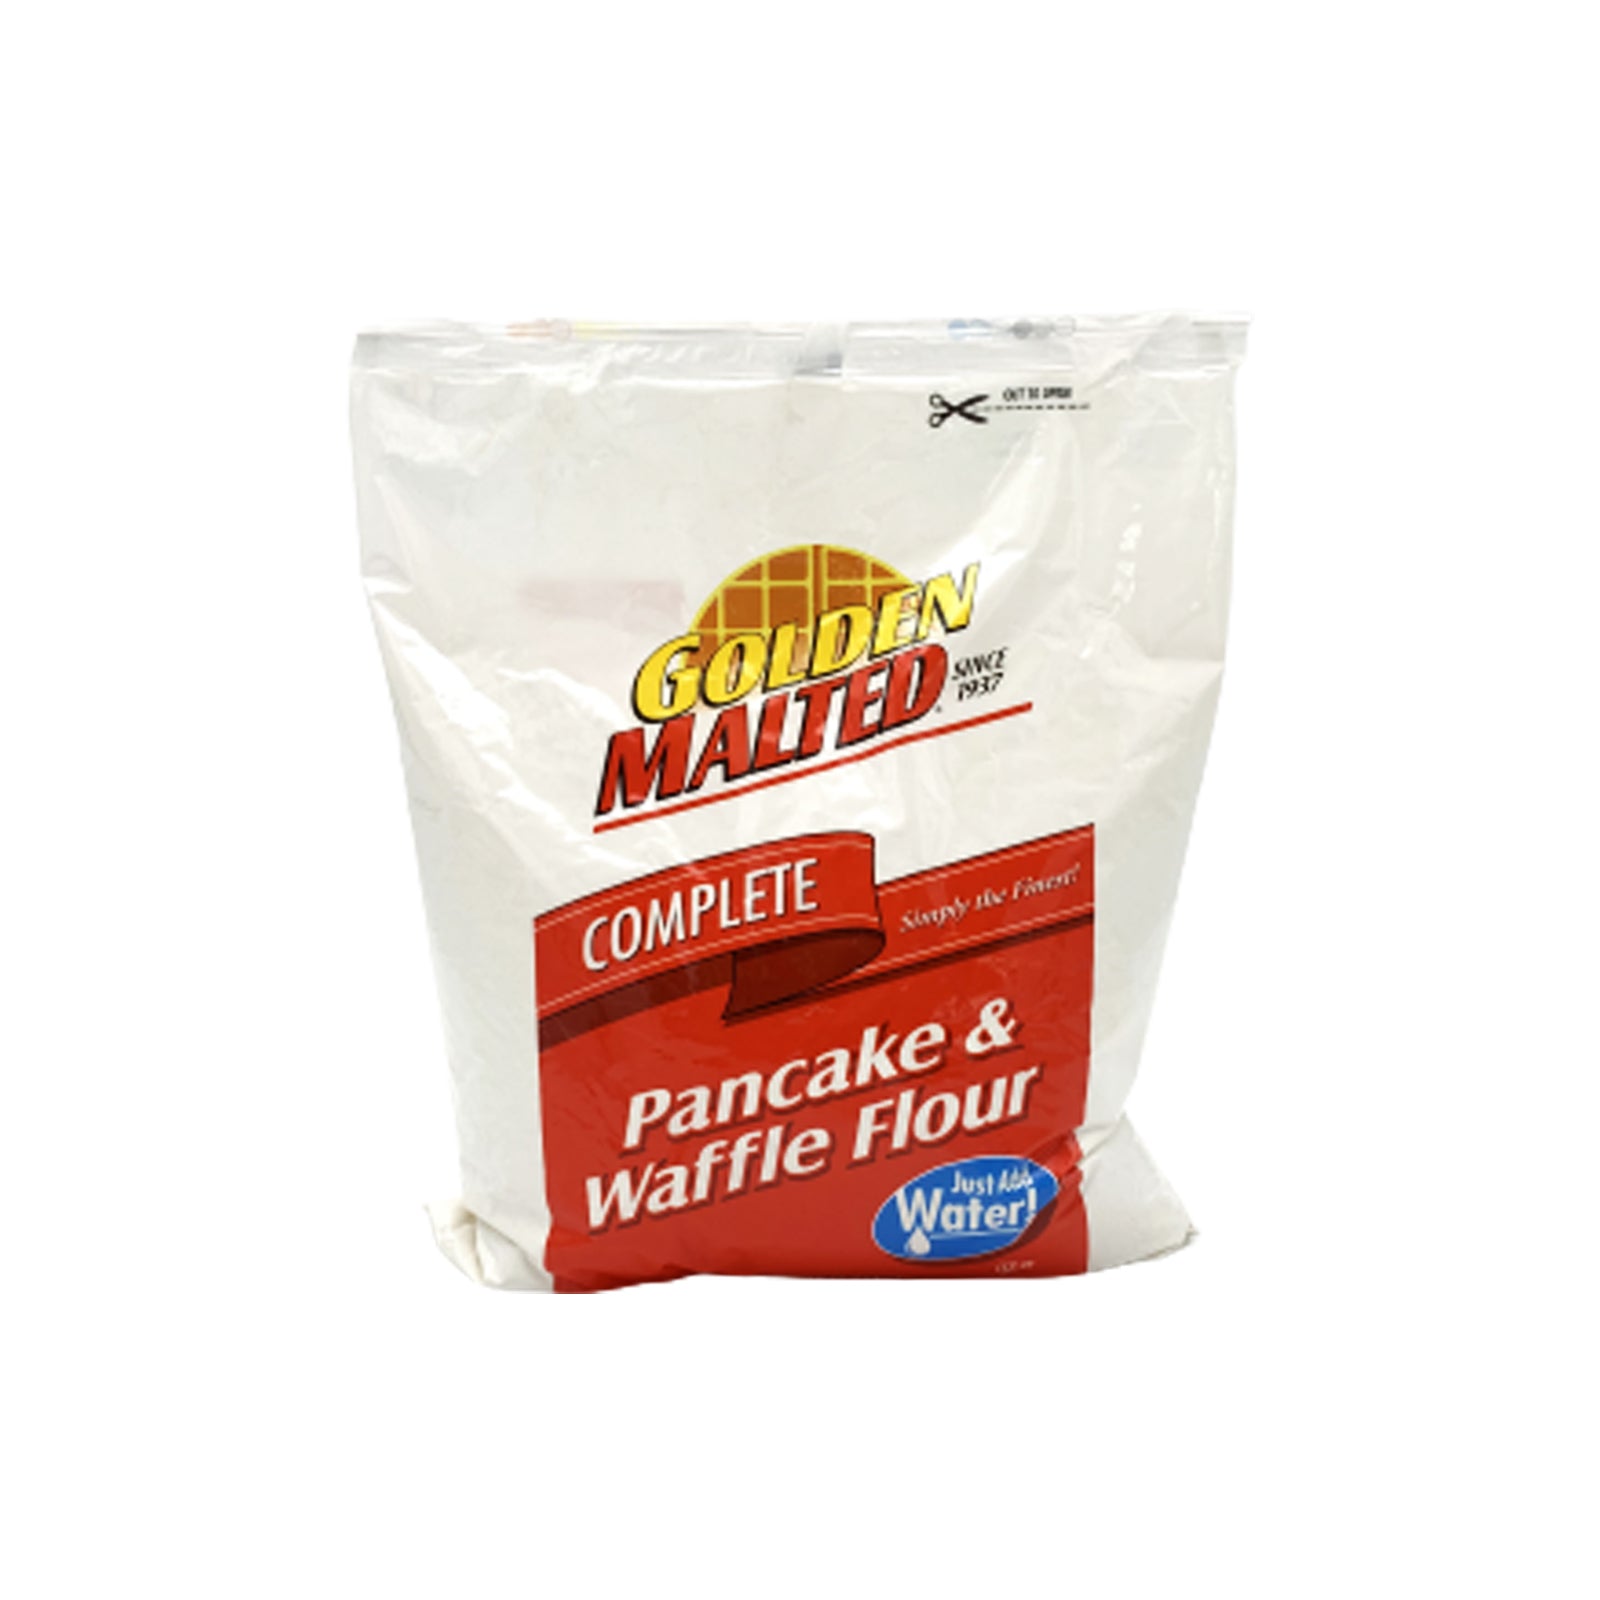 Carbon's Golden Malted Pancake and Waffle Flour Mix -  Complete Mix - Just Add Water